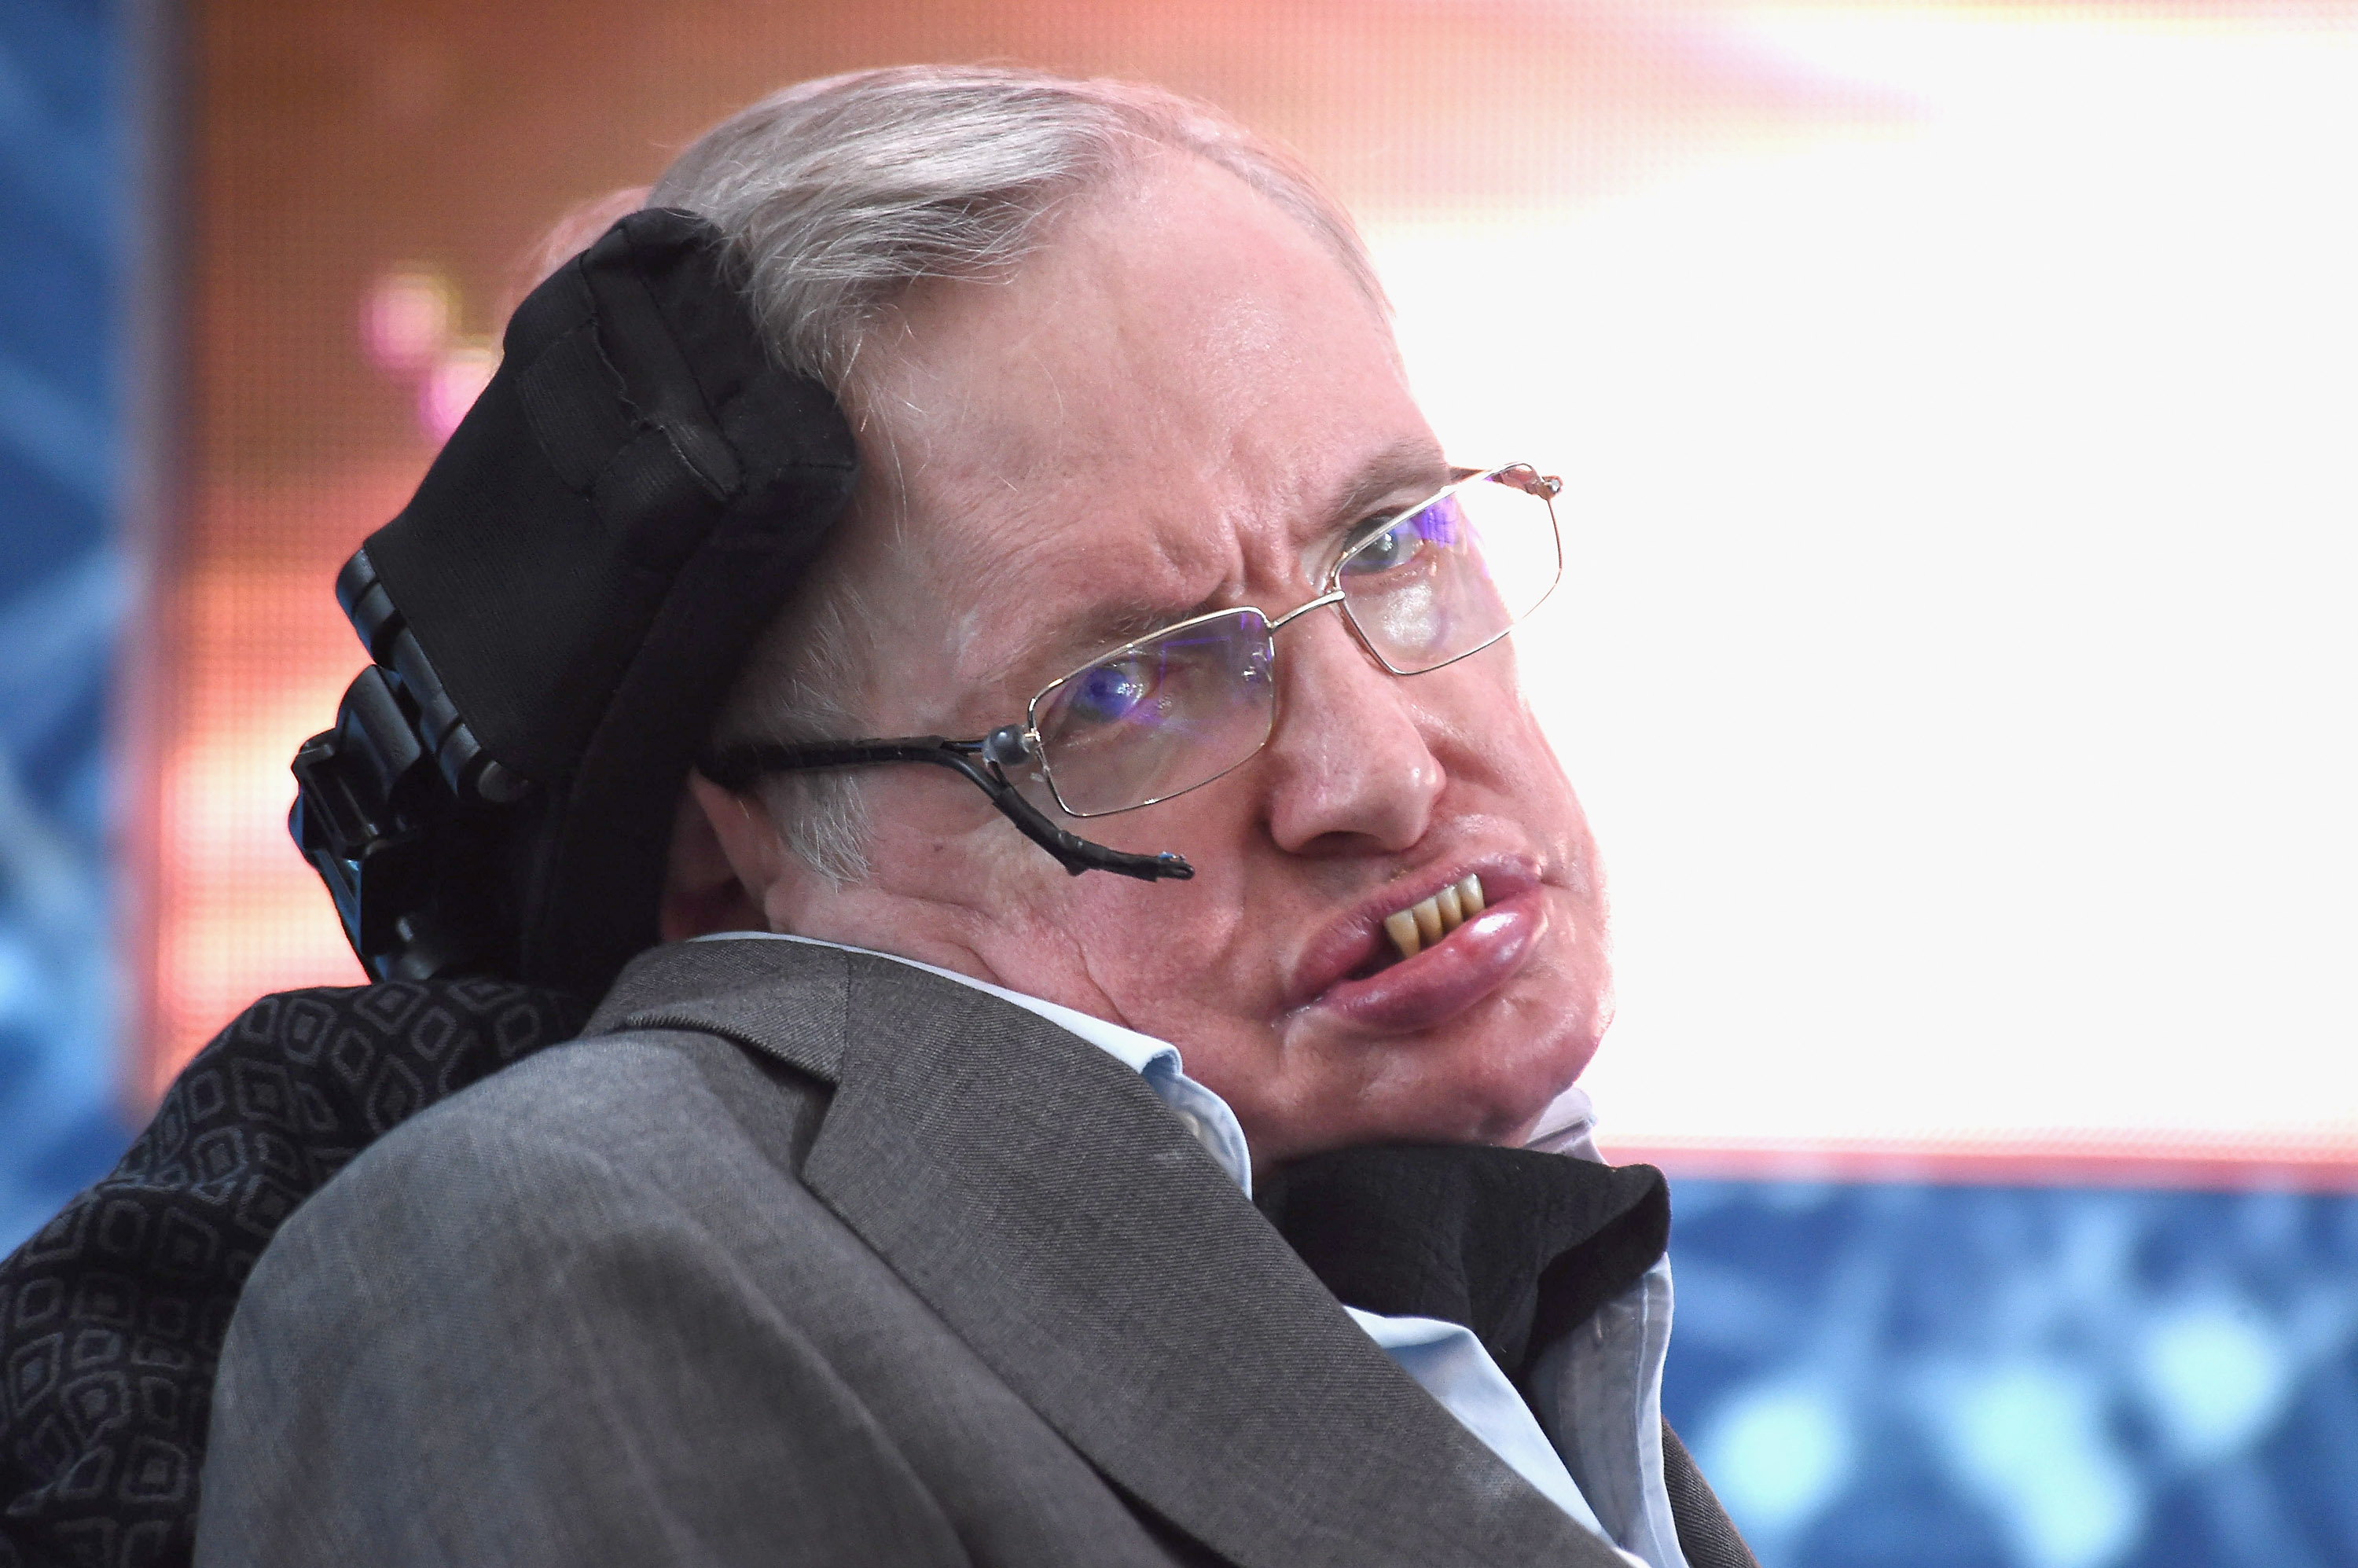 Cosmologist Stephen Hawking attends the New Space Exploration Initiative "Breakthrough Starshot" Announcement at One World Observatory on April 12, 2016 in New York City. (Gary Gershoff—WireImage/Getty Images)